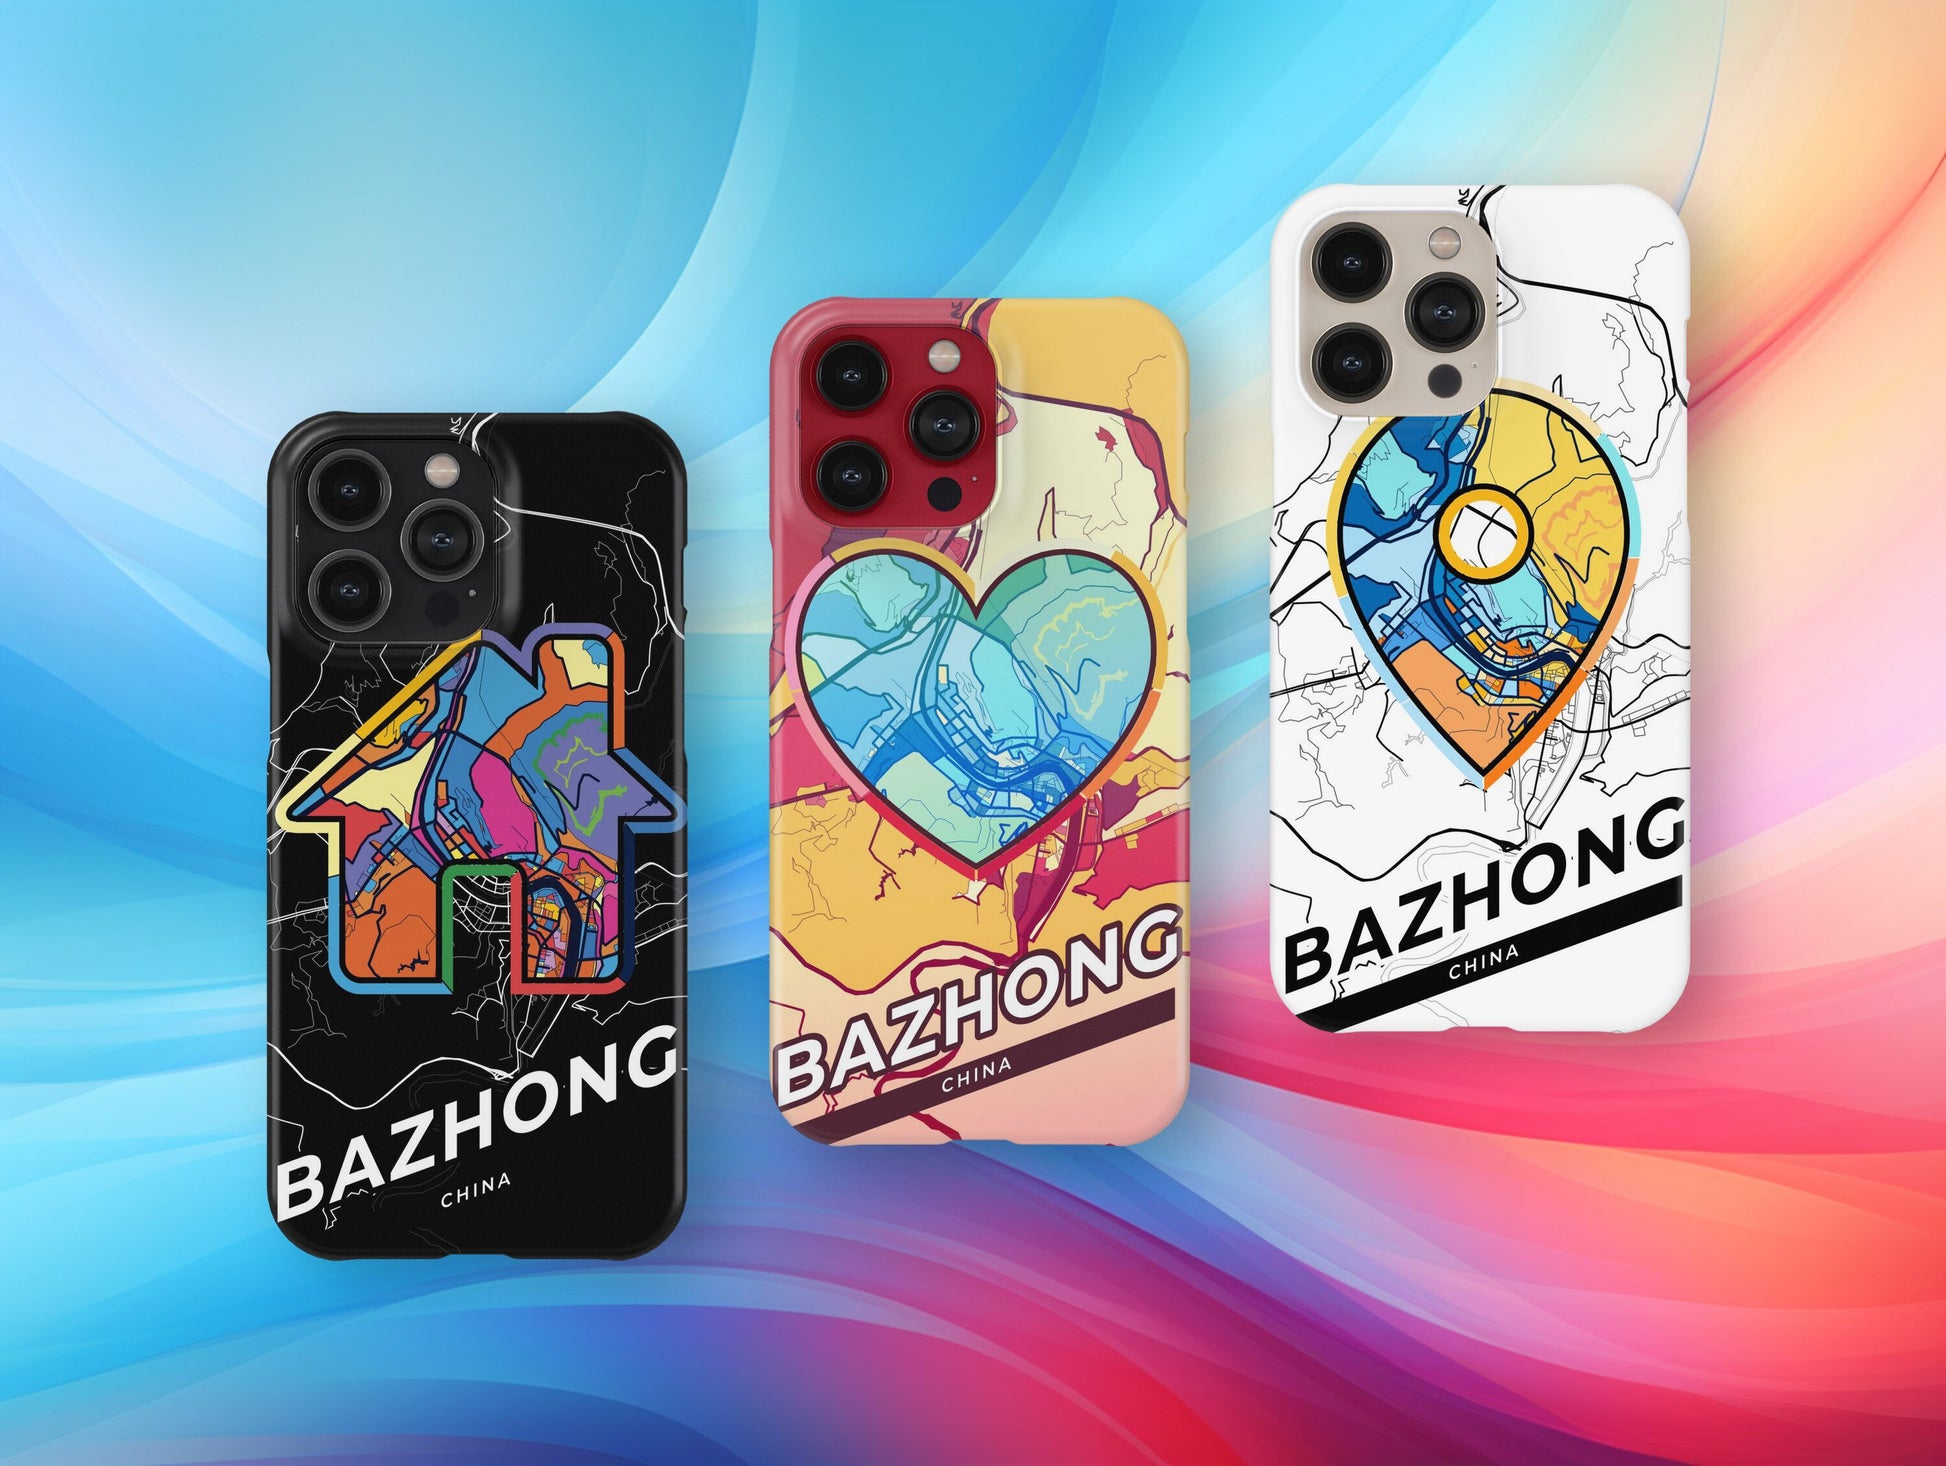 Bazhong China slim phone case with colorful icon. Birthday, wedding or housewarming gift. Couple match cases.